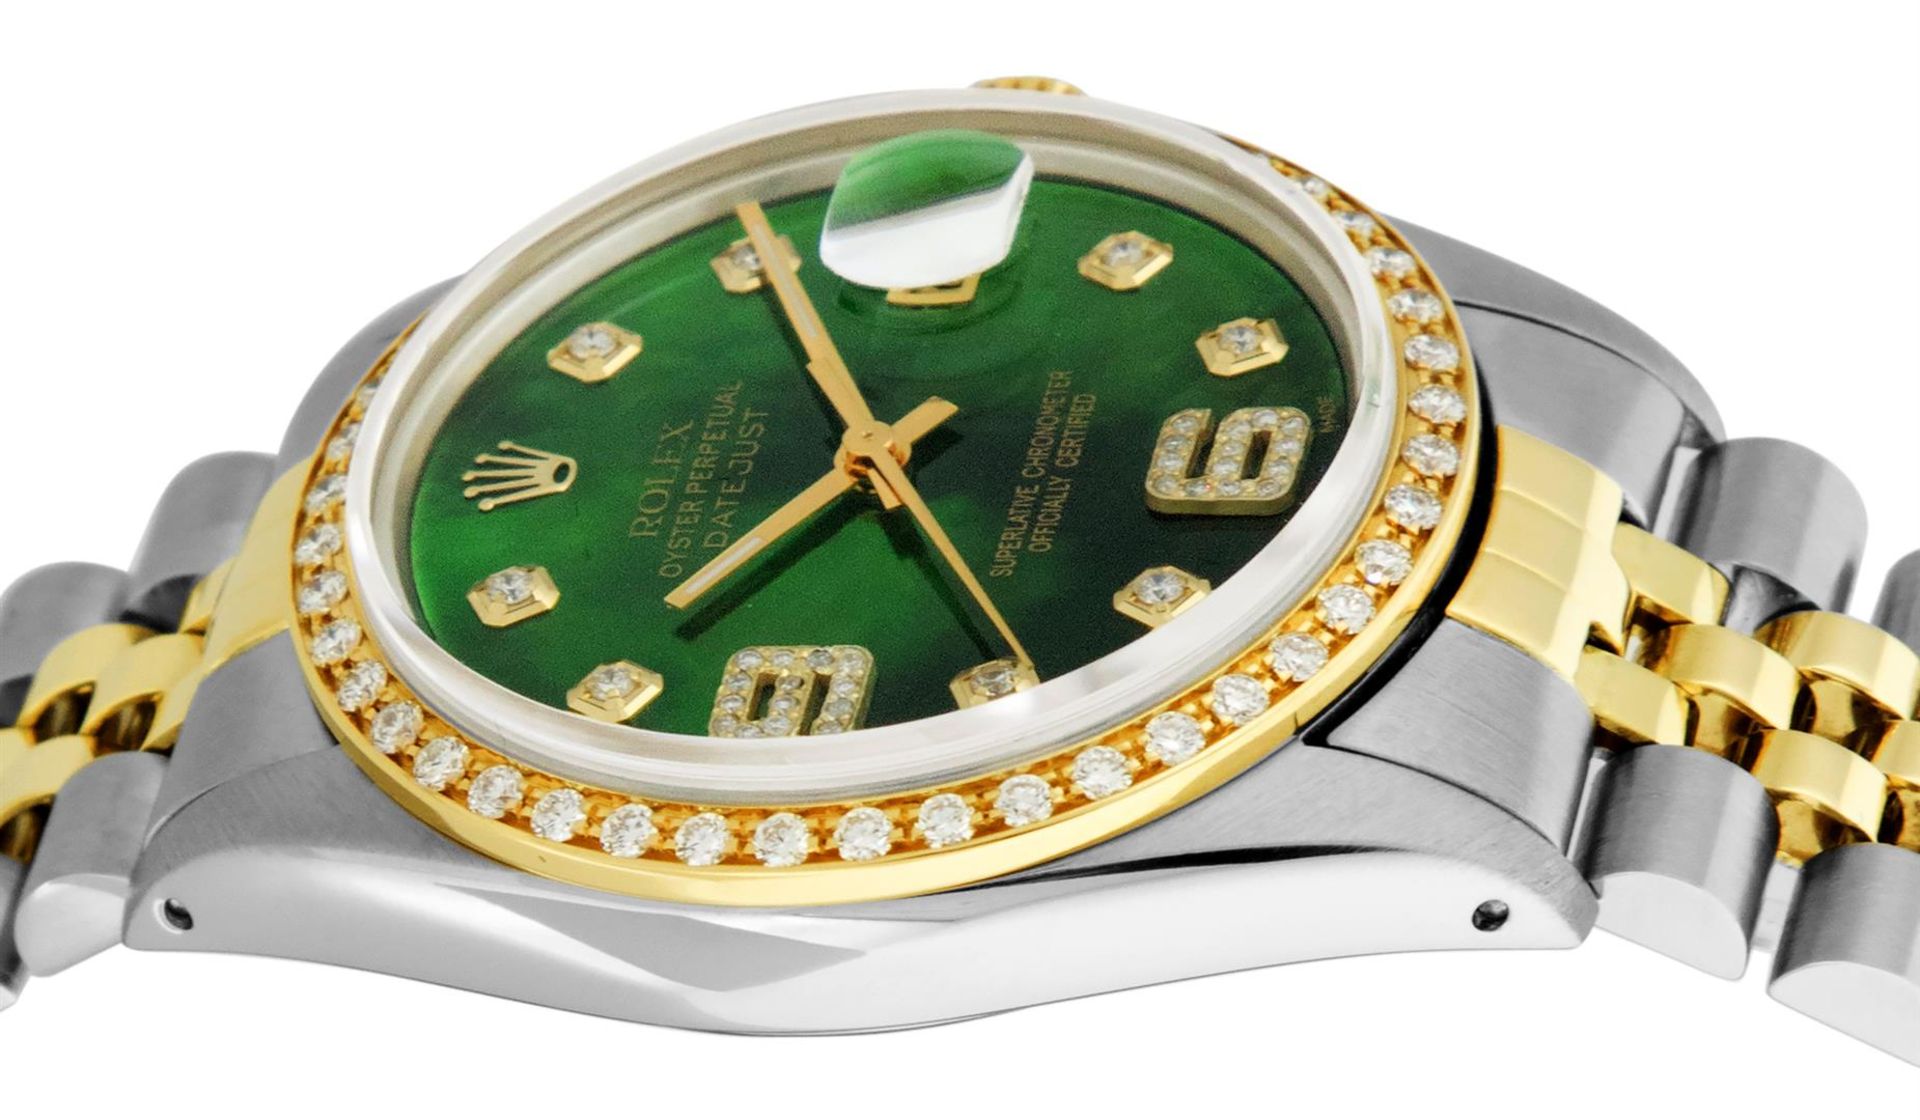 Rolex 2 Tone YG/SS Green Diamond Oyster Perpetual Datejust Wristwatch 36MM - Image 8 of 9